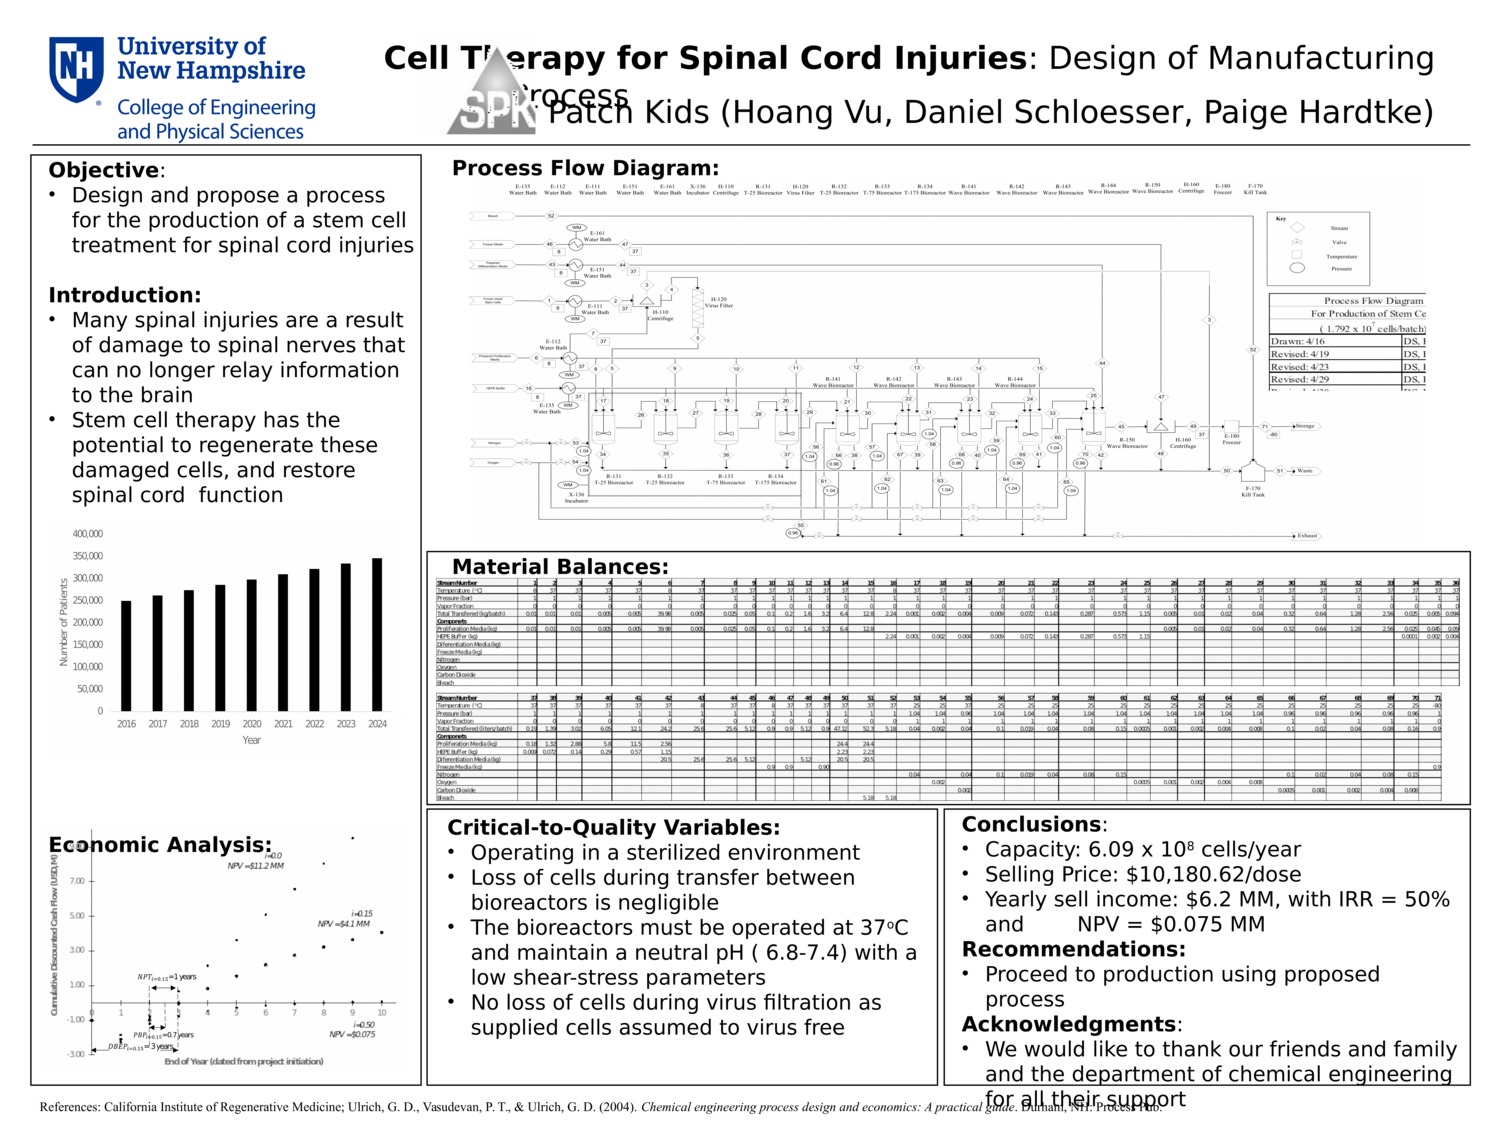 Cell Therapy For Spinal Cord Injuries by hin4